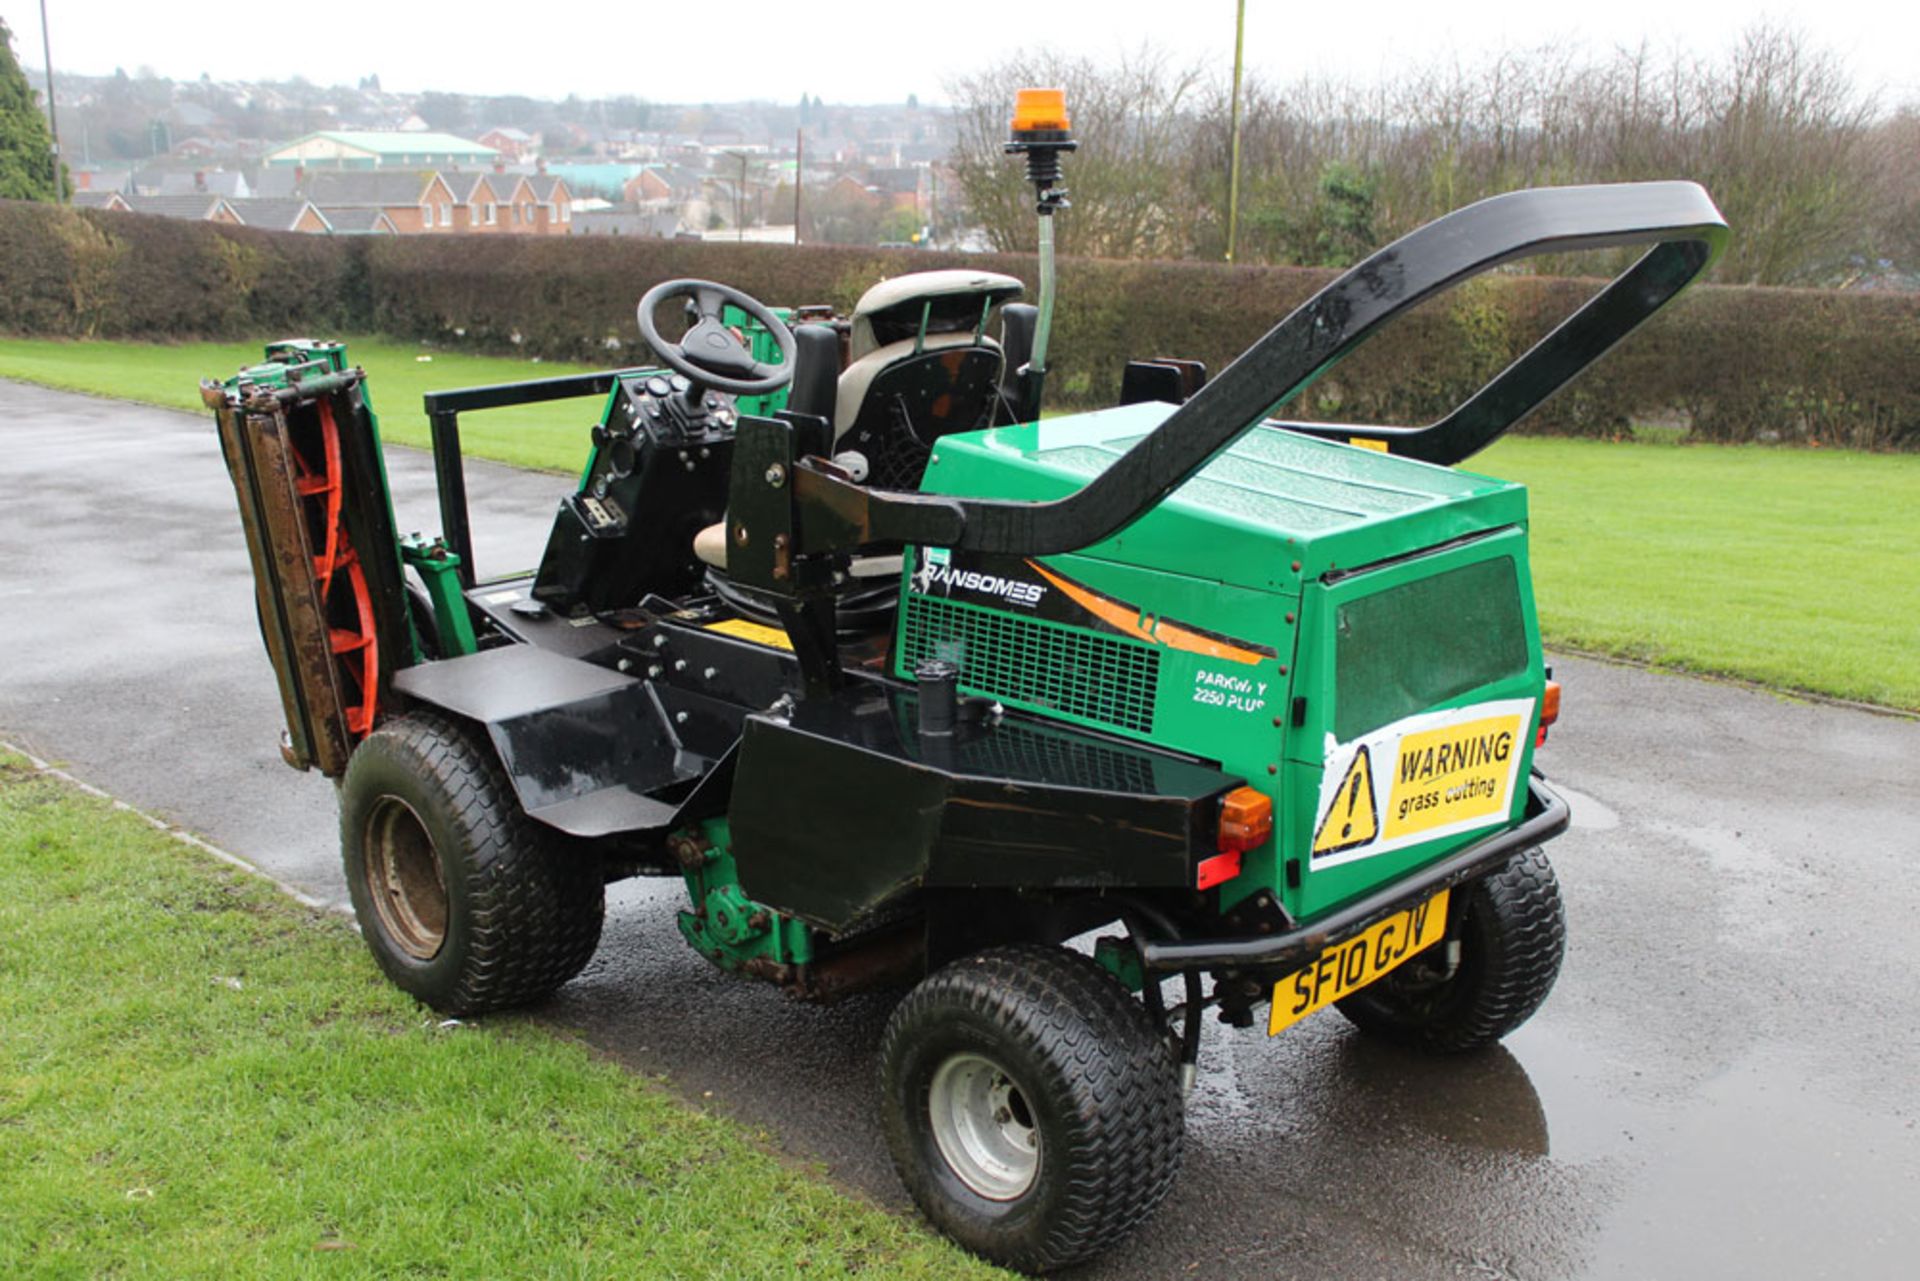 2010 Ransomes Parkway 2250 Plus Ride On Cylinder Mowe - Image 2 of 2